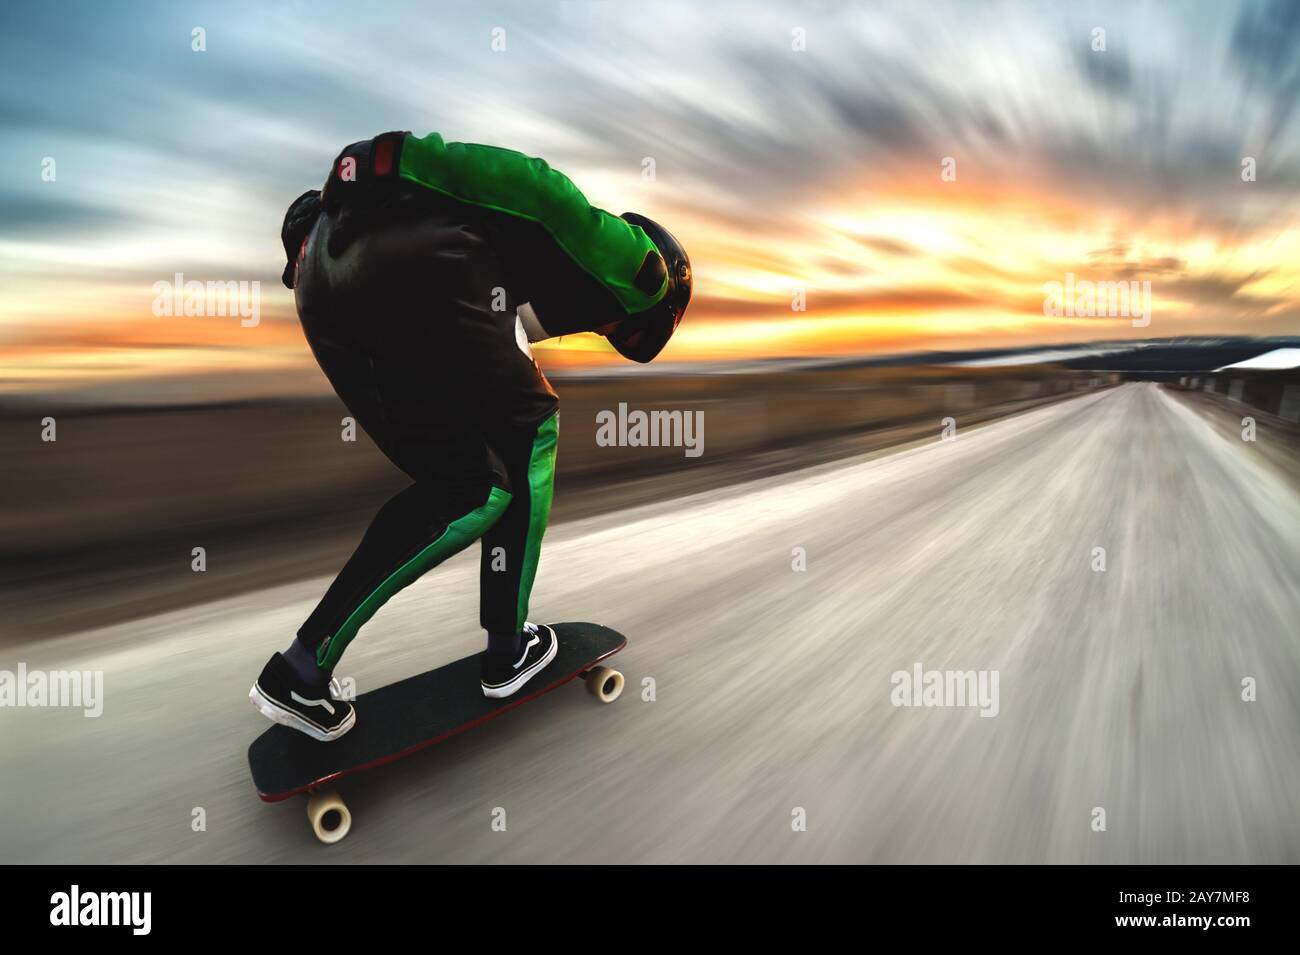 Longboarding Helmet High Resolution Stock Photography and Images - Alamy